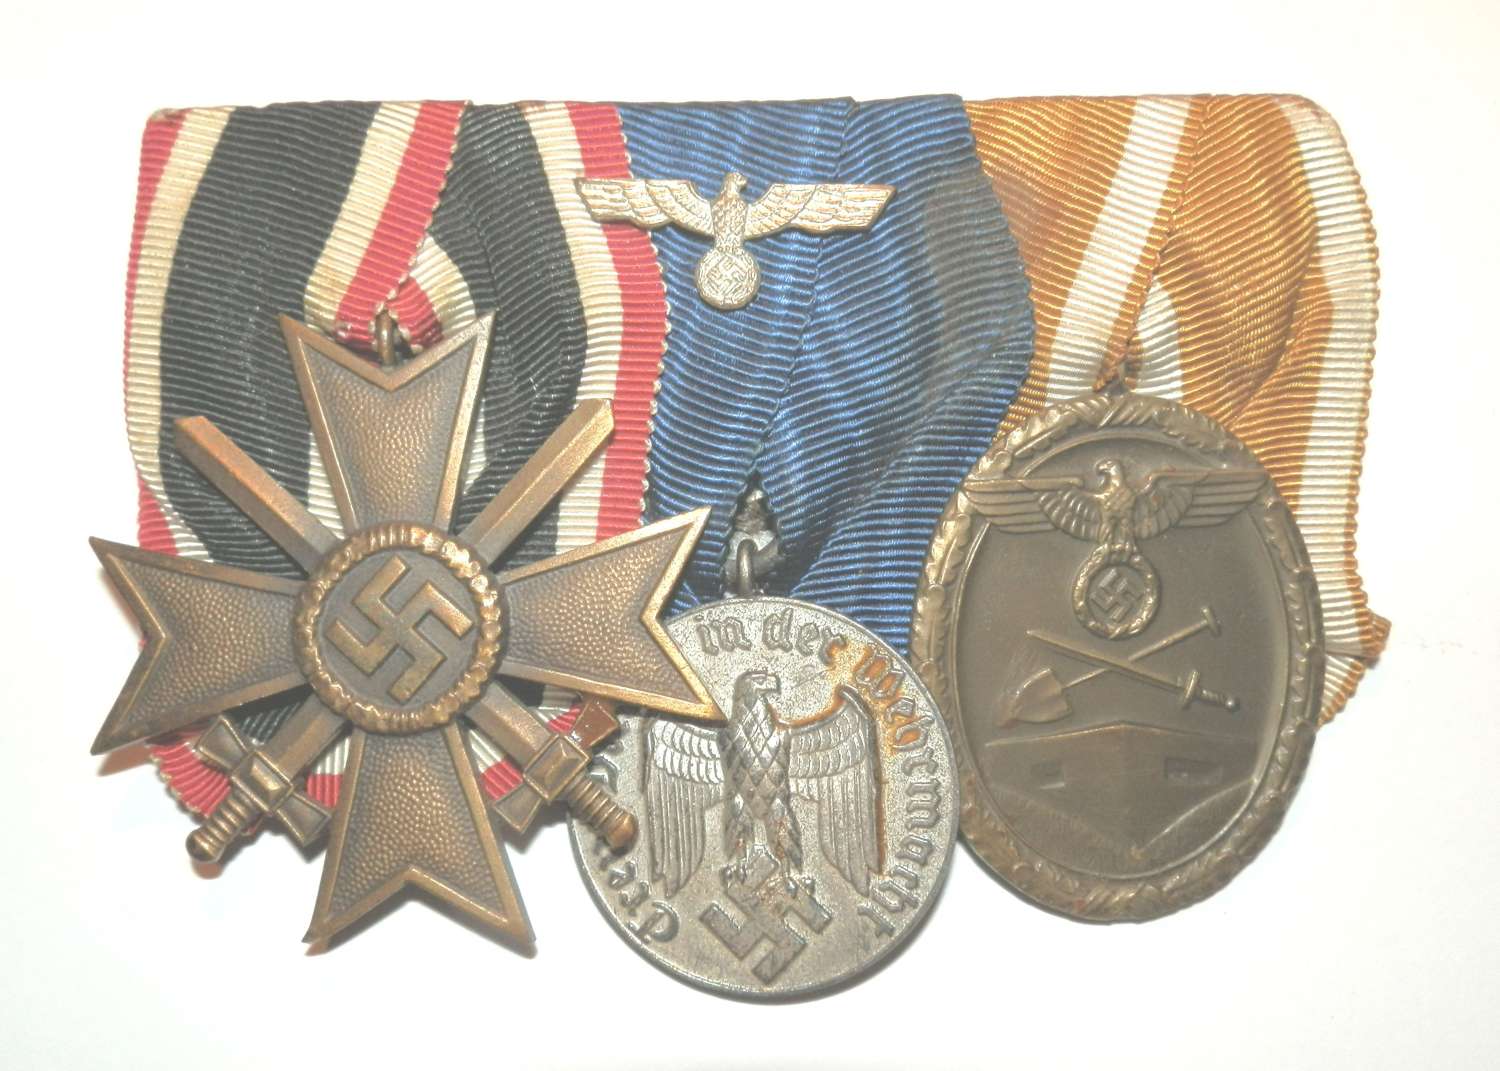 GROUP OF THREE. German Third Reich Medal Group.